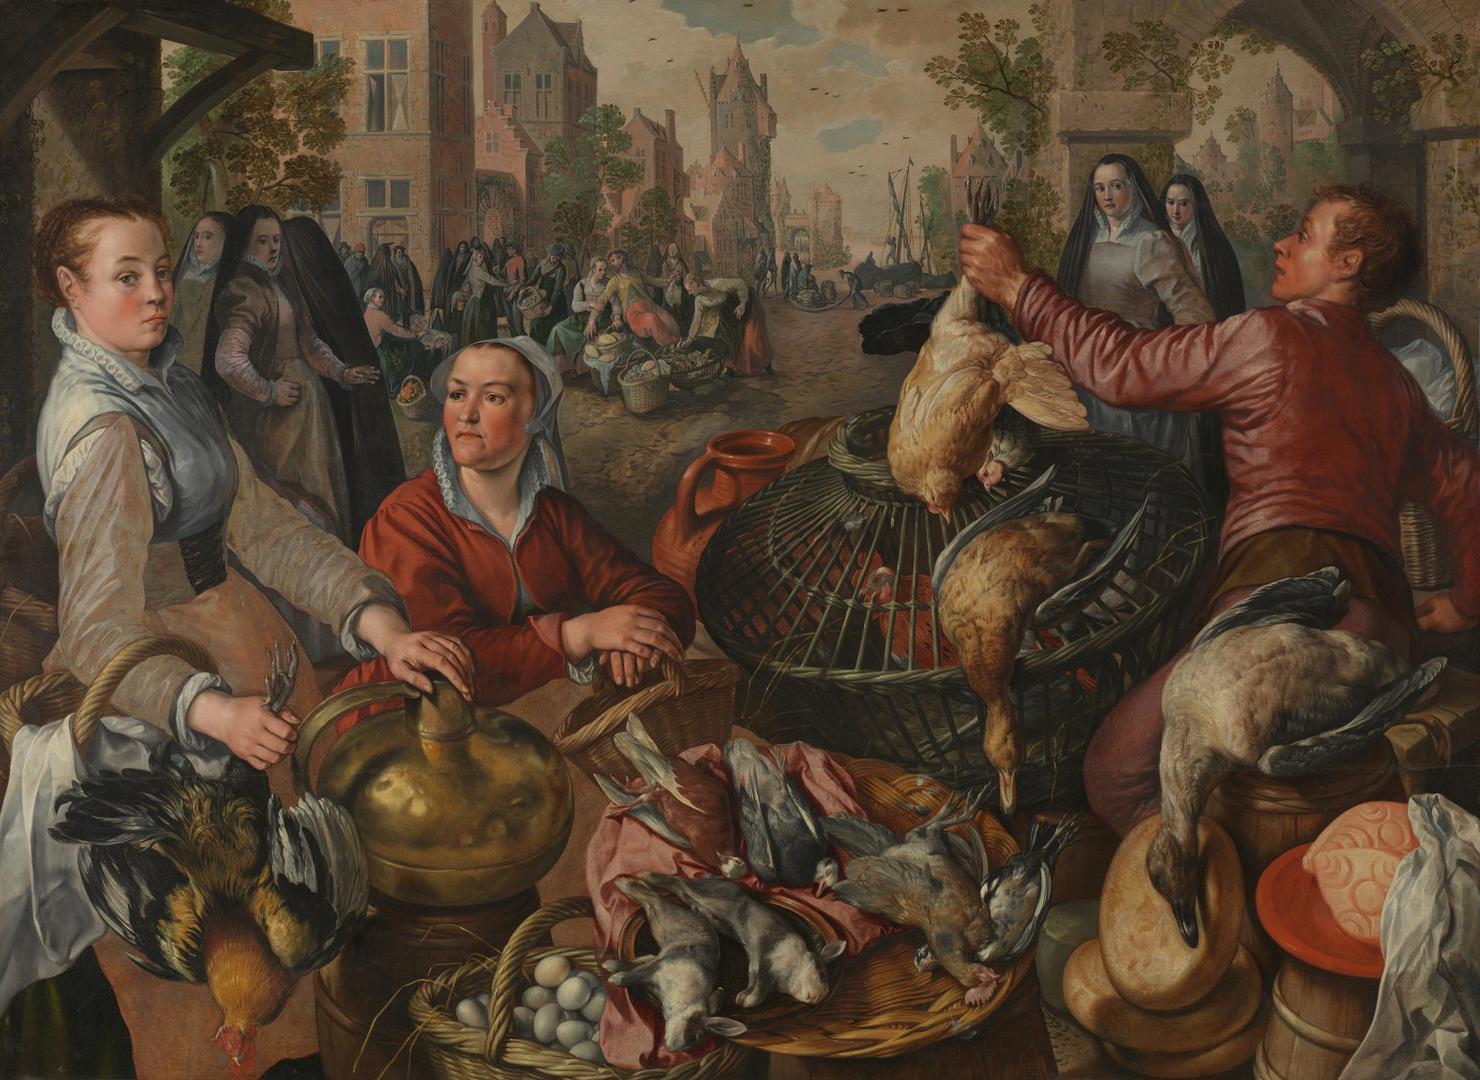 The Four Elements: Air by Joachim Beuckelaer